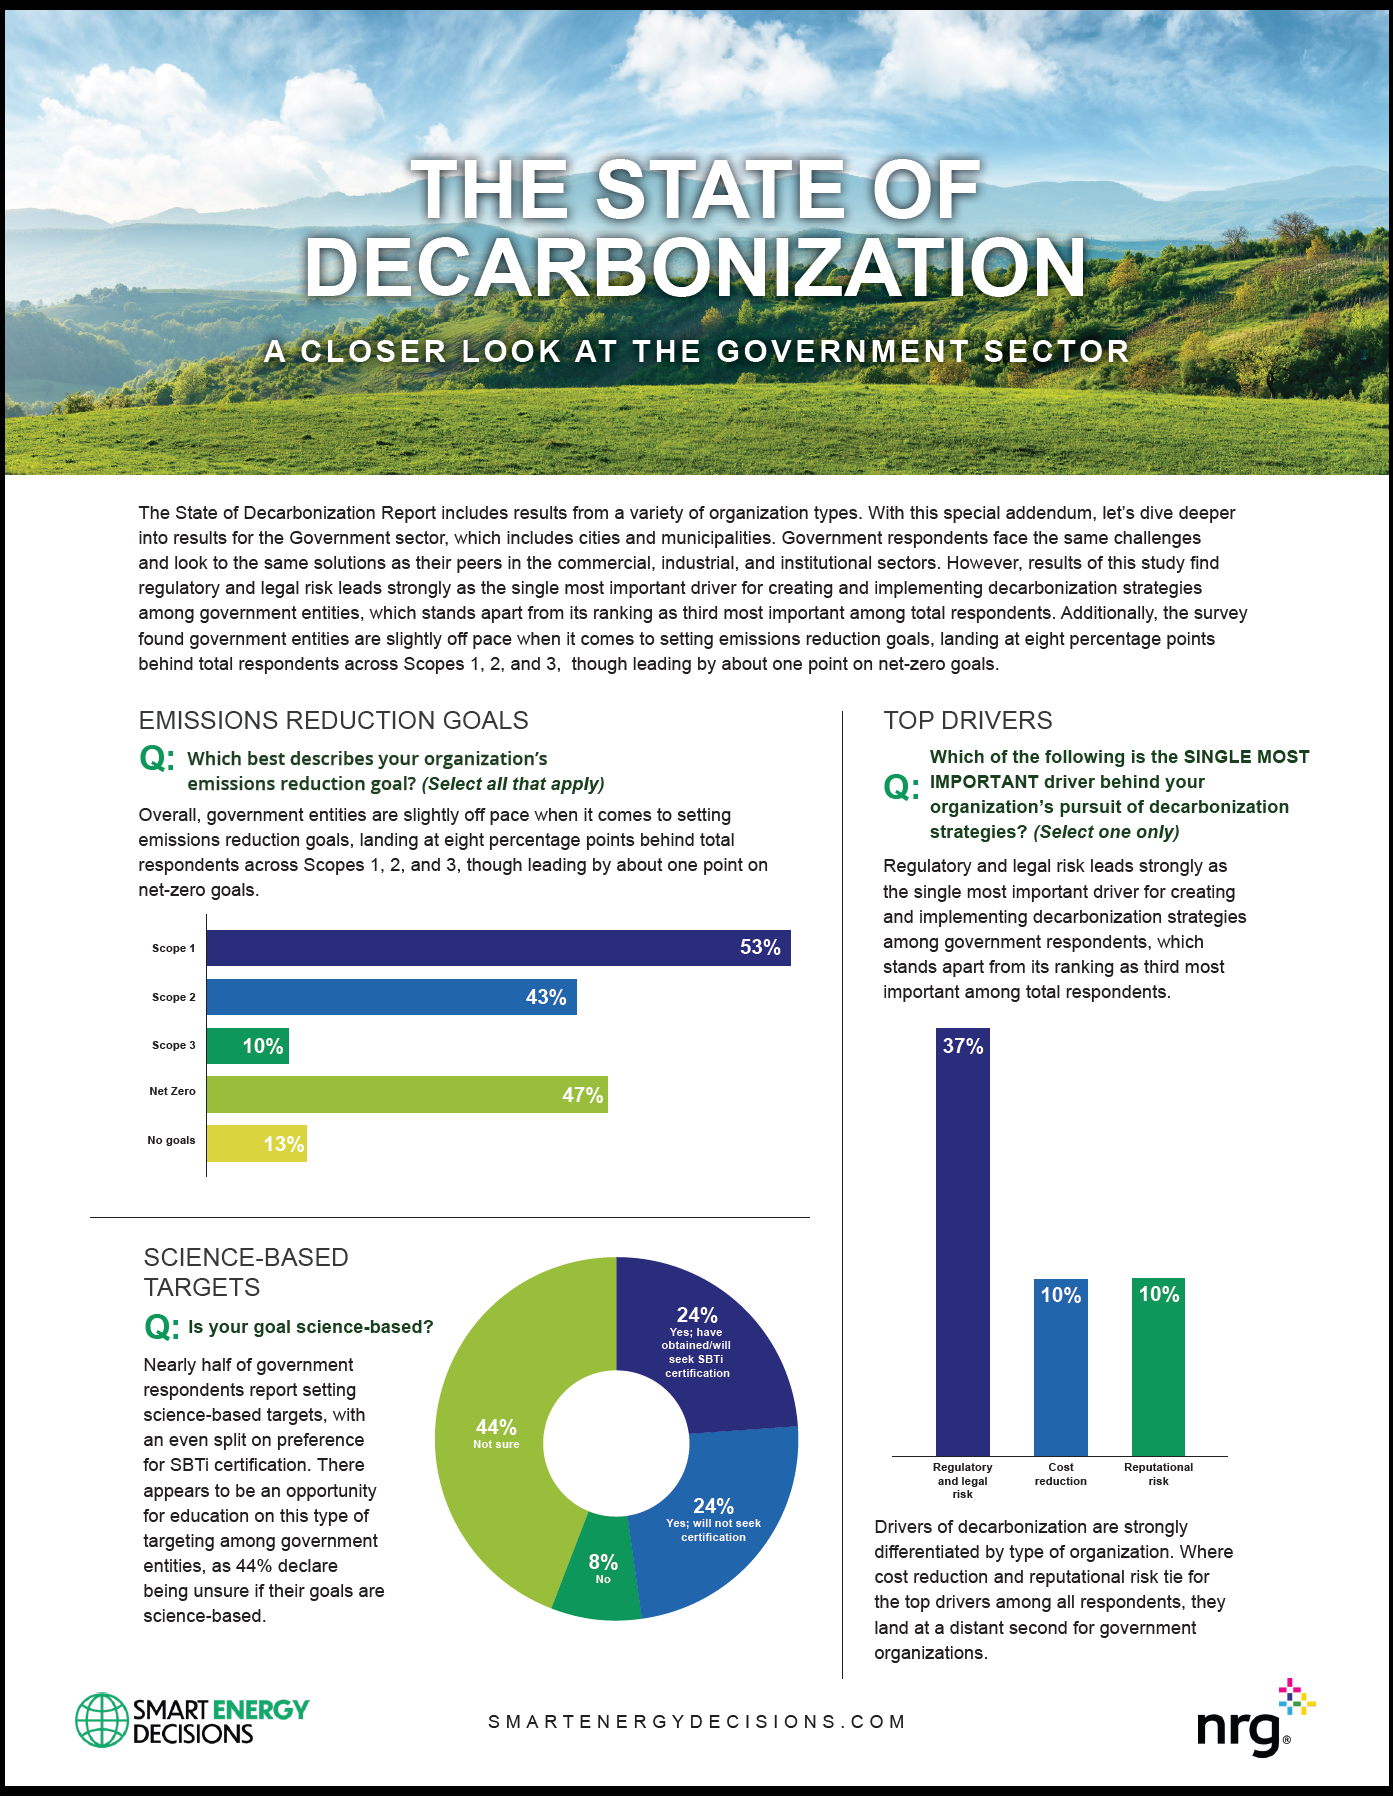 The State of Decarbonization: A Closer Look at the Government Sector